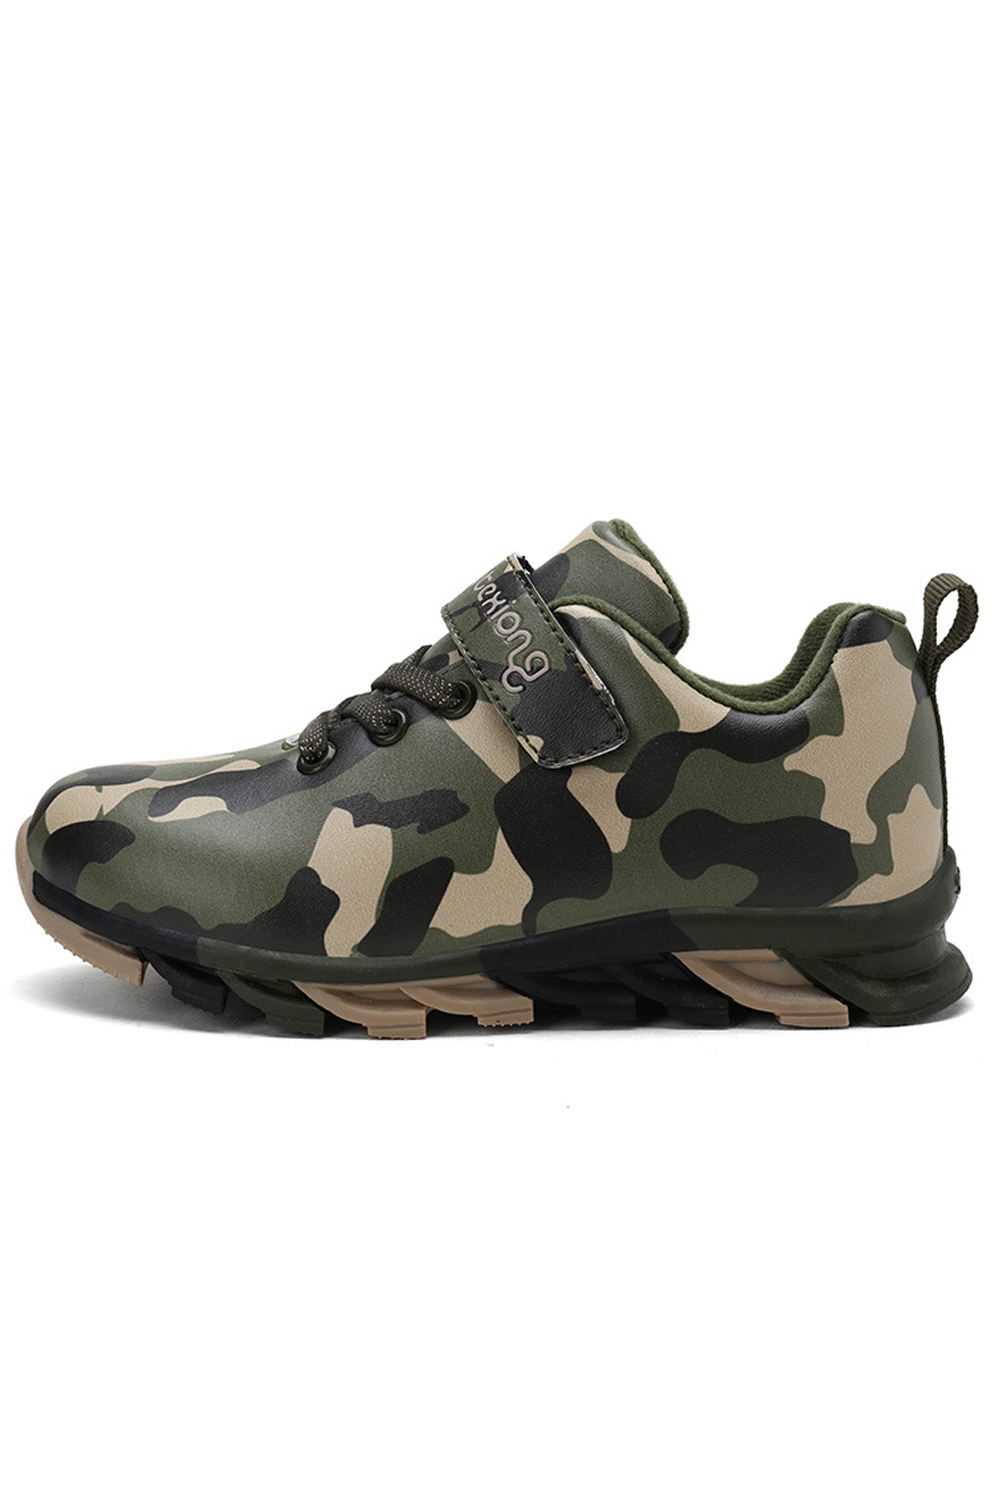 Camouflage Army Green (QTX-1751 Leather Surface) 1751